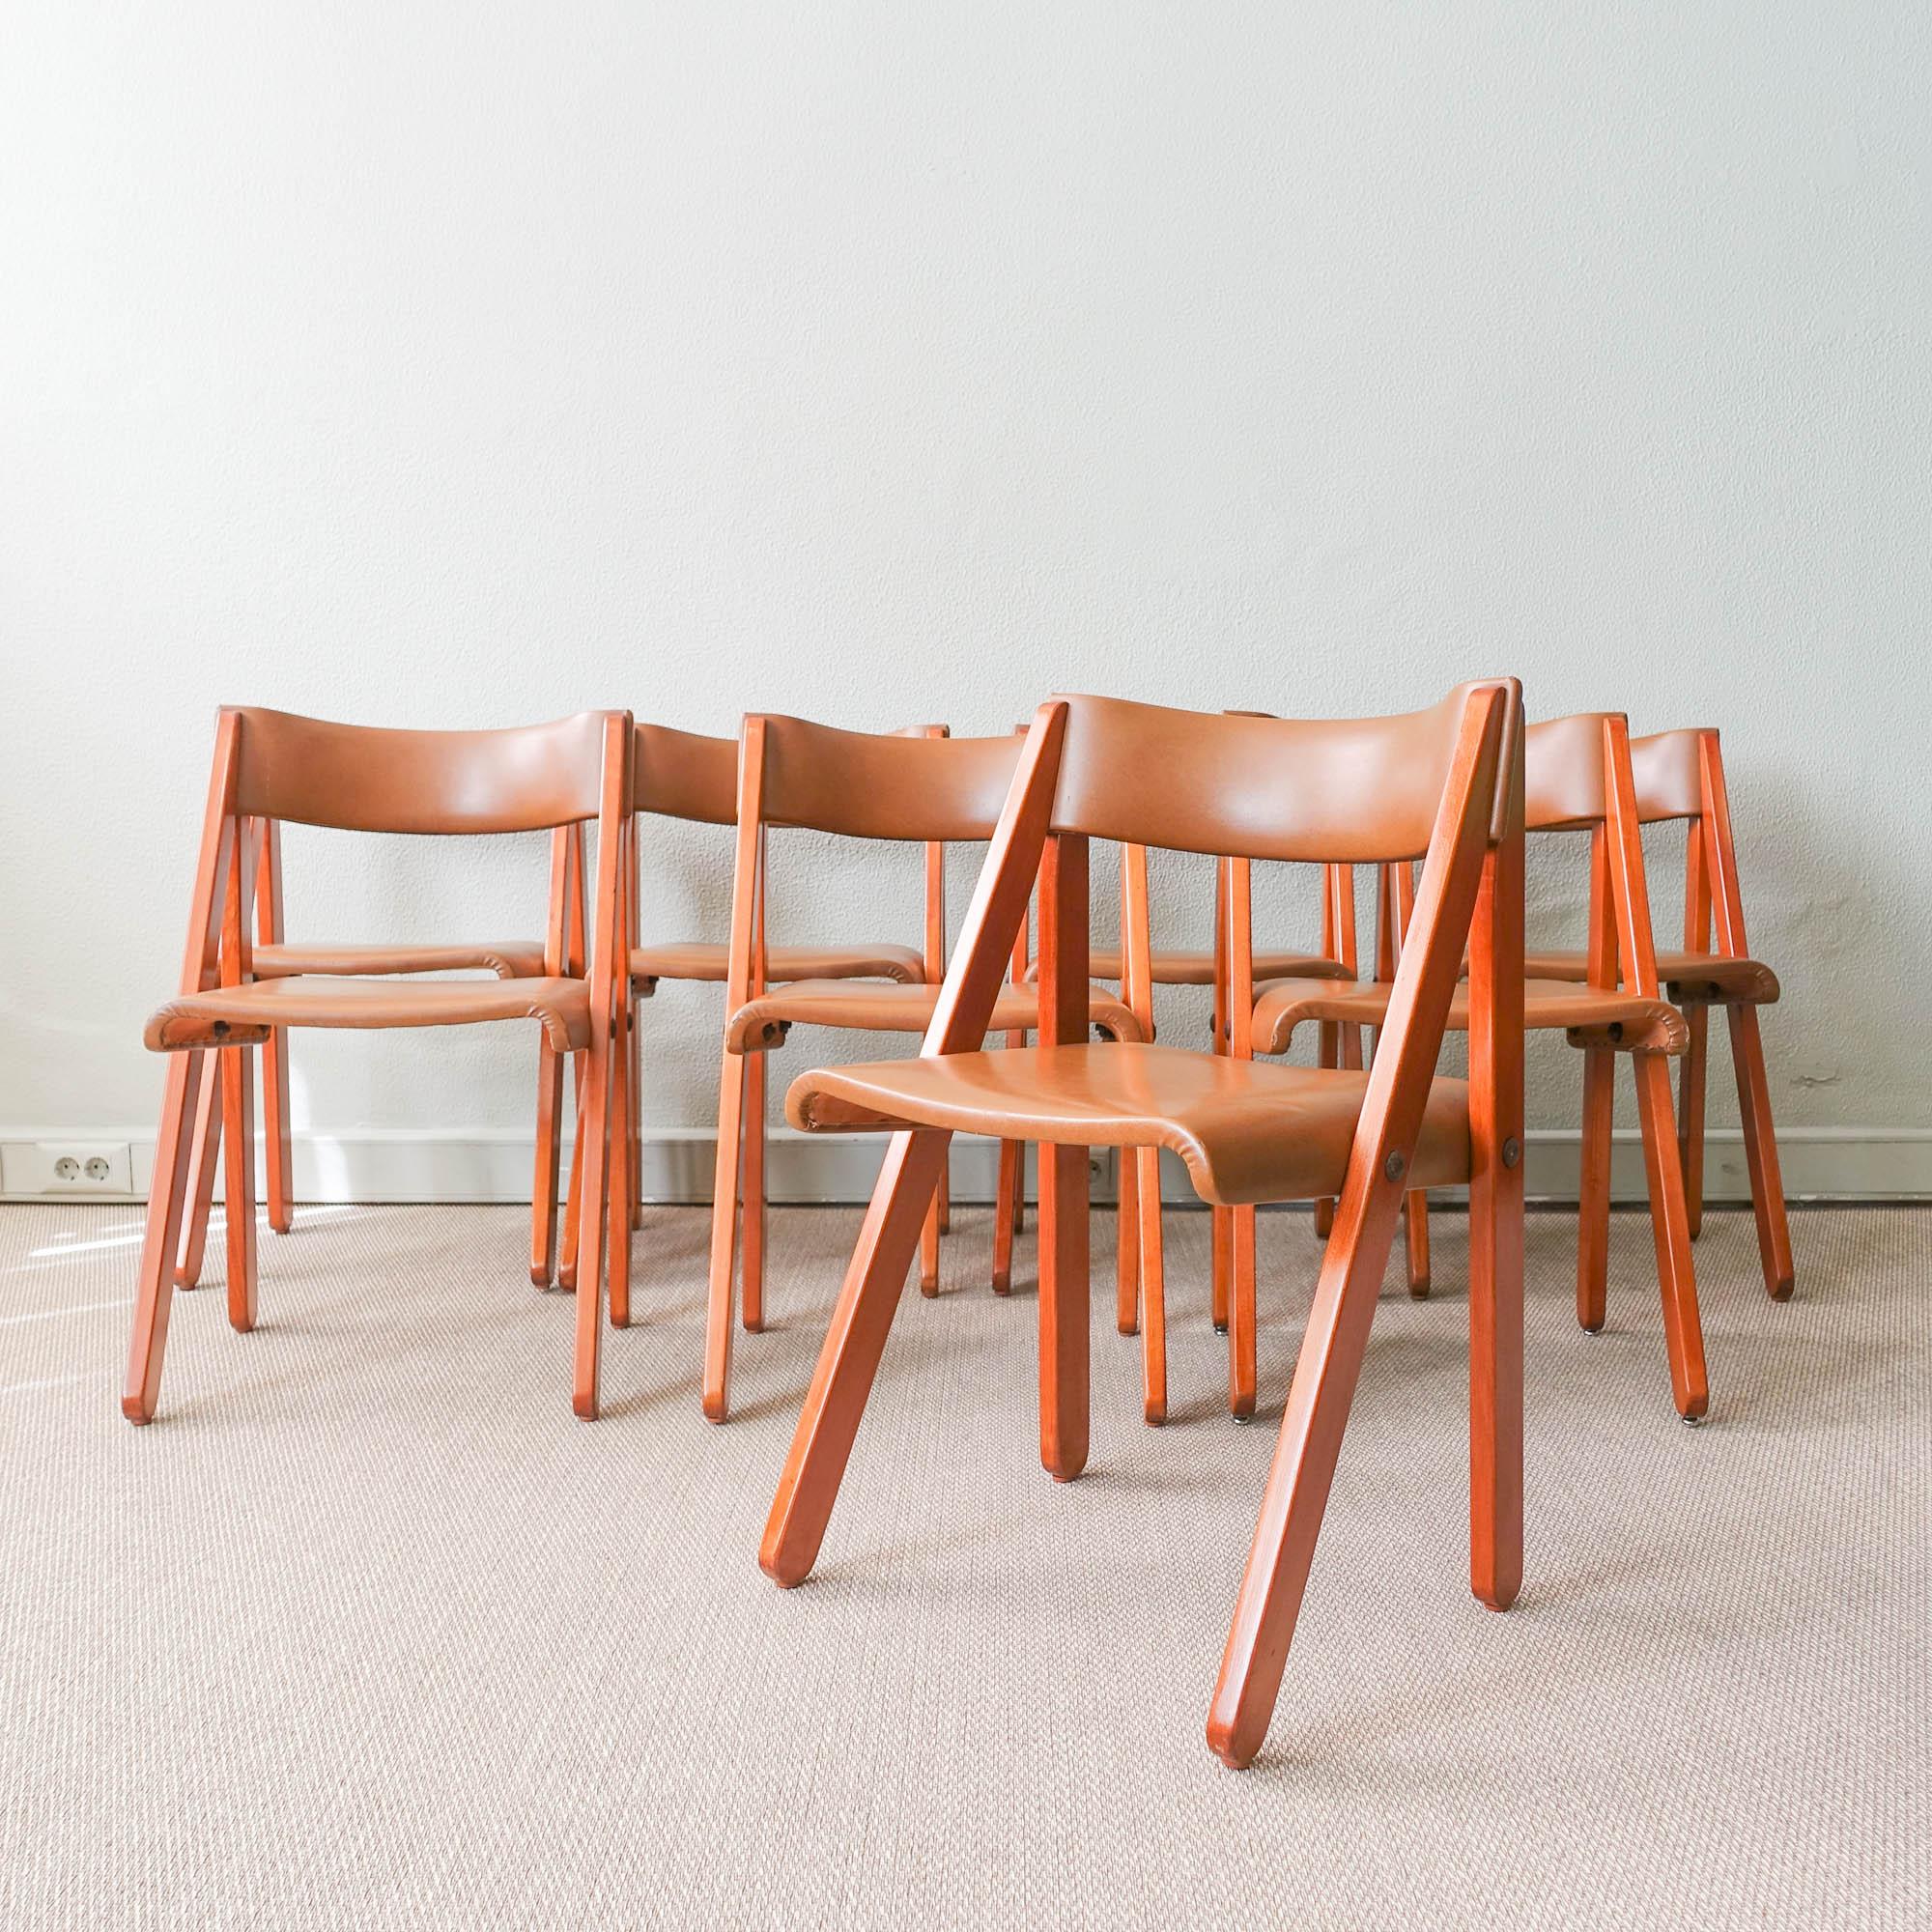 This set of eight chairs was designed by Gastão Machado for Móveis Olaio, Portugal, in 1978. Gastão Machado designed this model for young people's room, however its detachable molded plywood structure also allowed it to be used quite successfully in